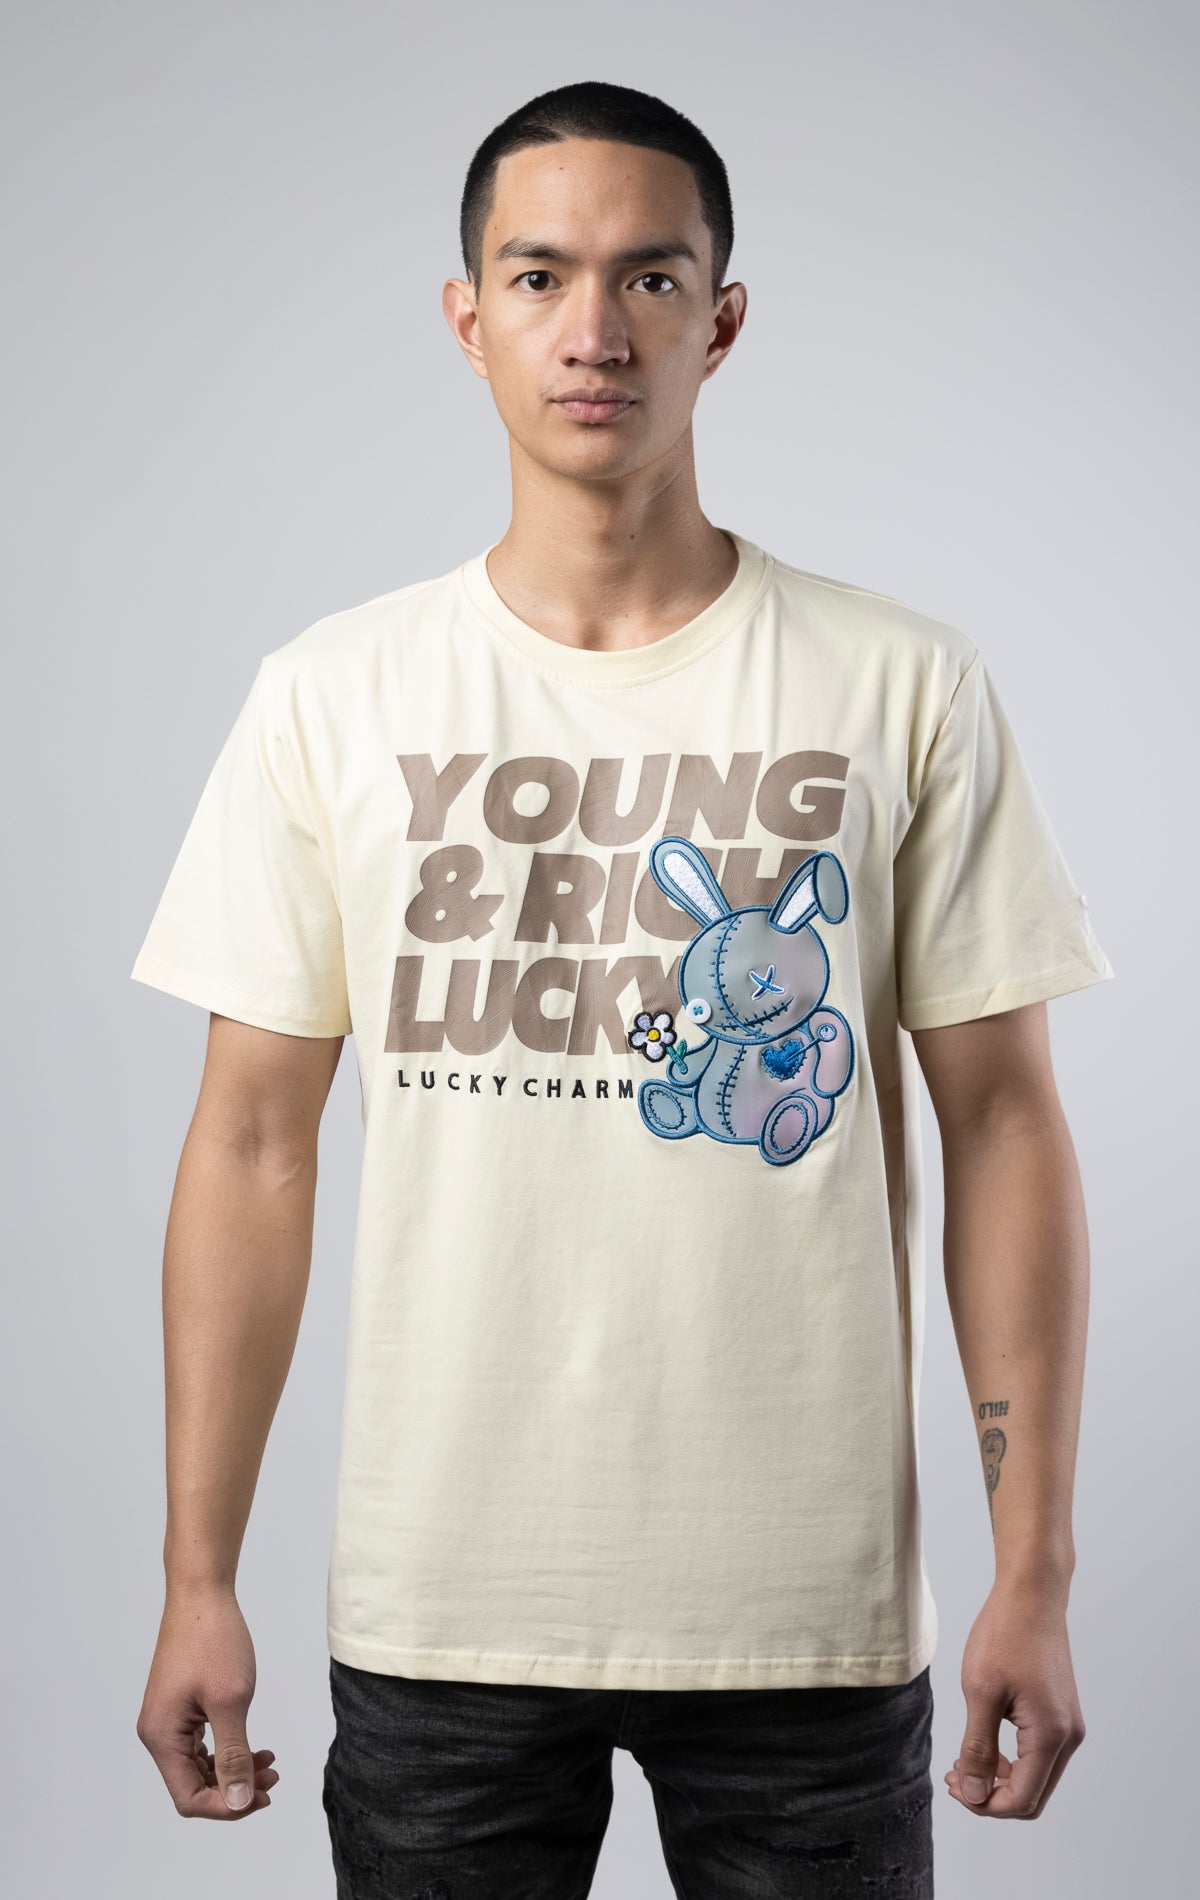 Stylish off white T-shirt featuring a motivational 'Young, Rich, and Lucky' slogan